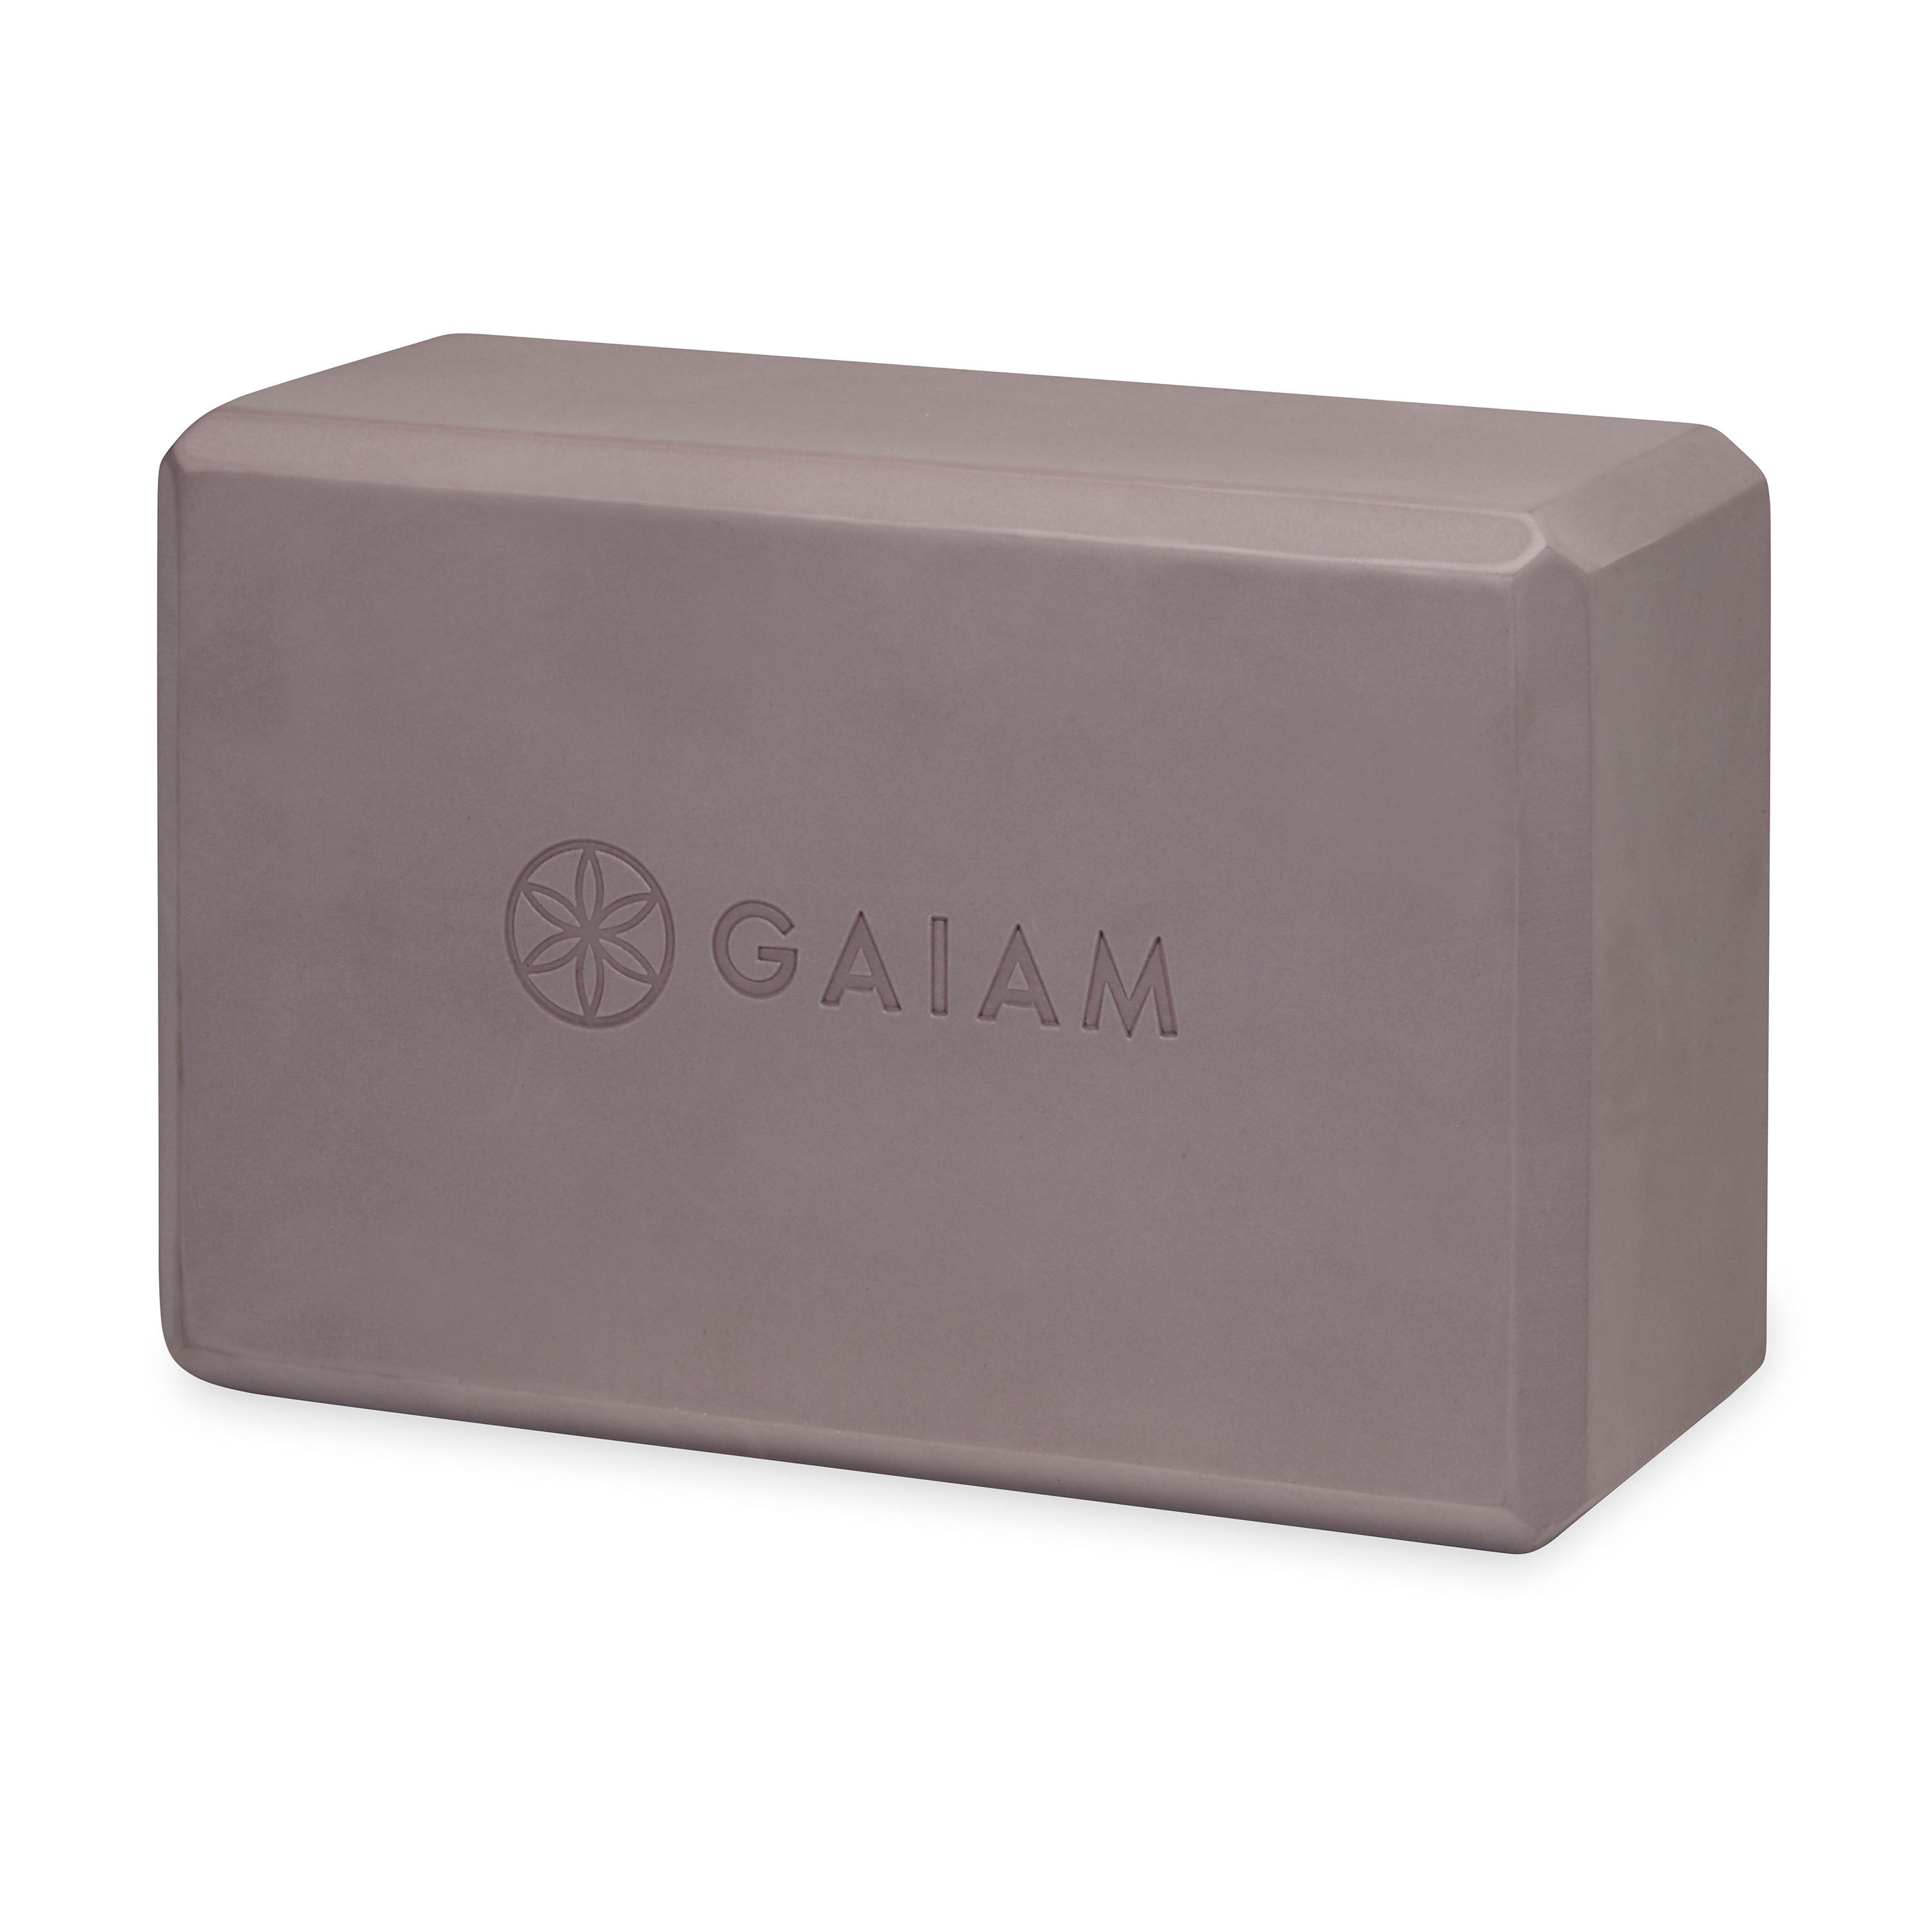 Buy GAIAM Yoga Block Skyline Tri-Color - GAIAM, delivered to your home